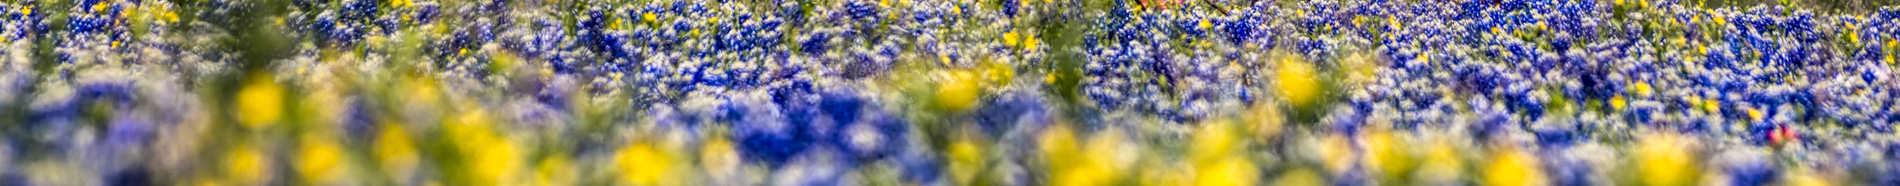 field of bluebonnets and pansies, foreground out of focus